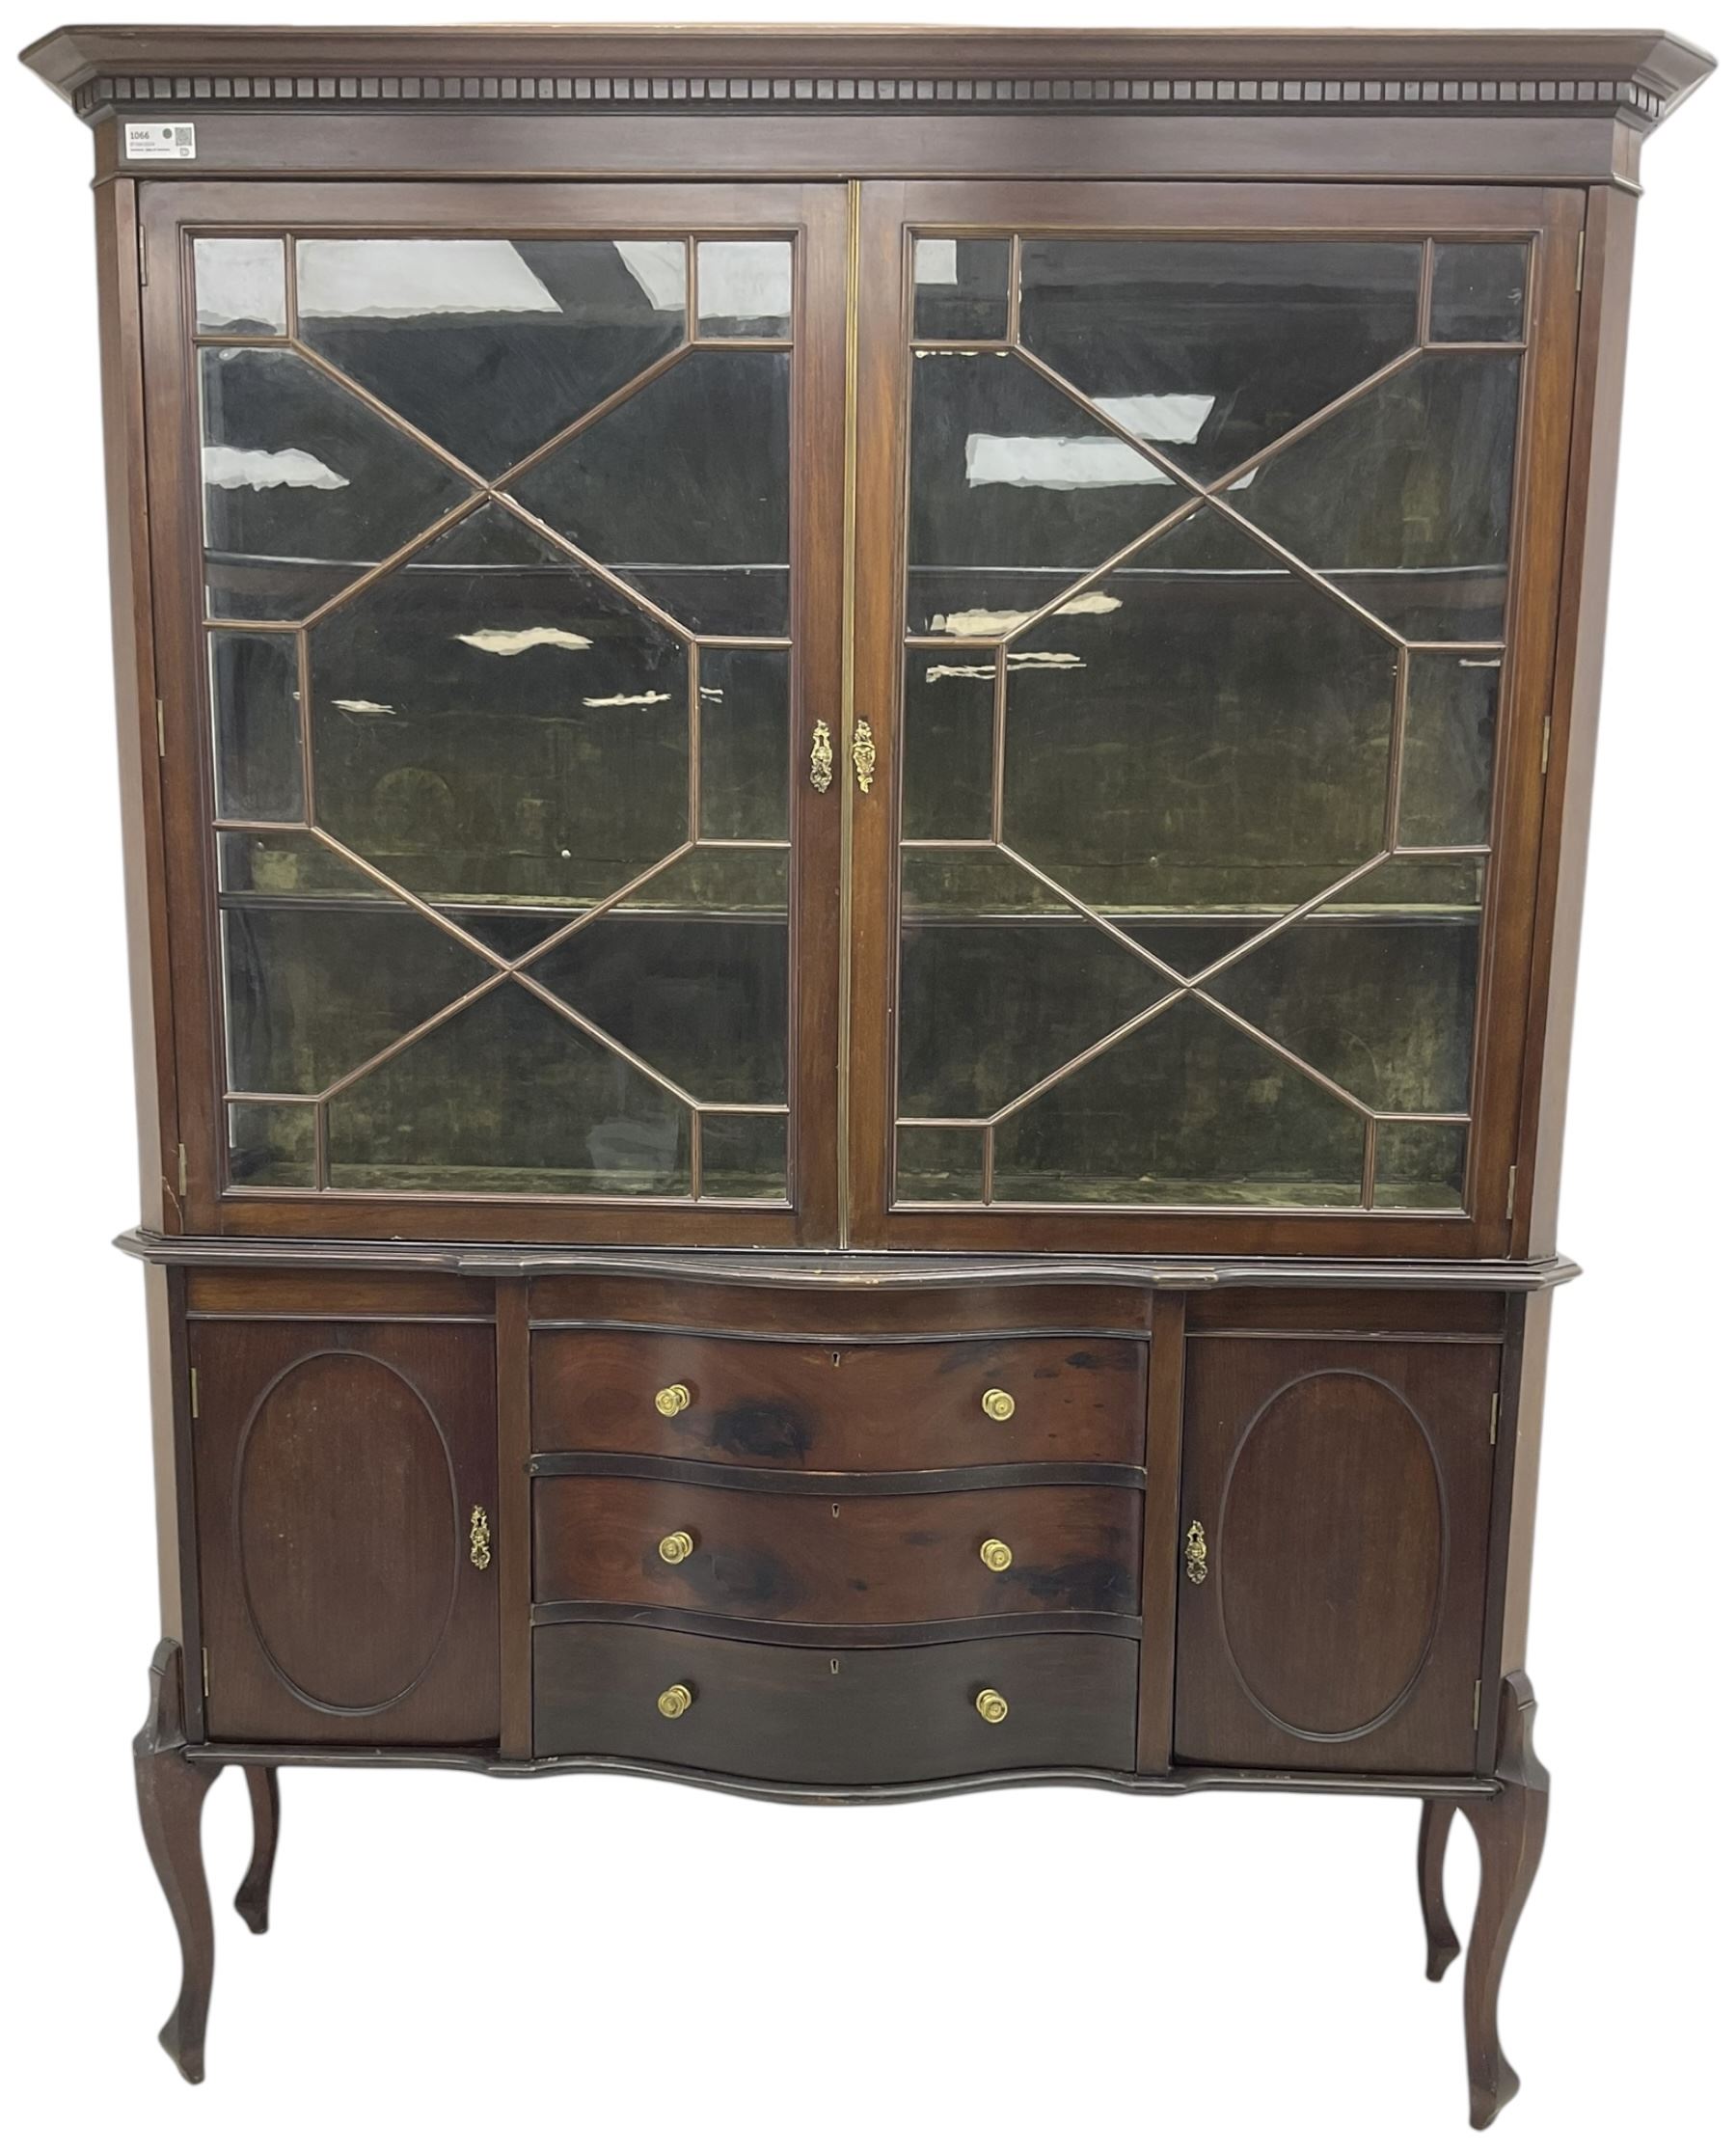 Late 19th century mahogany display cabinet on stand